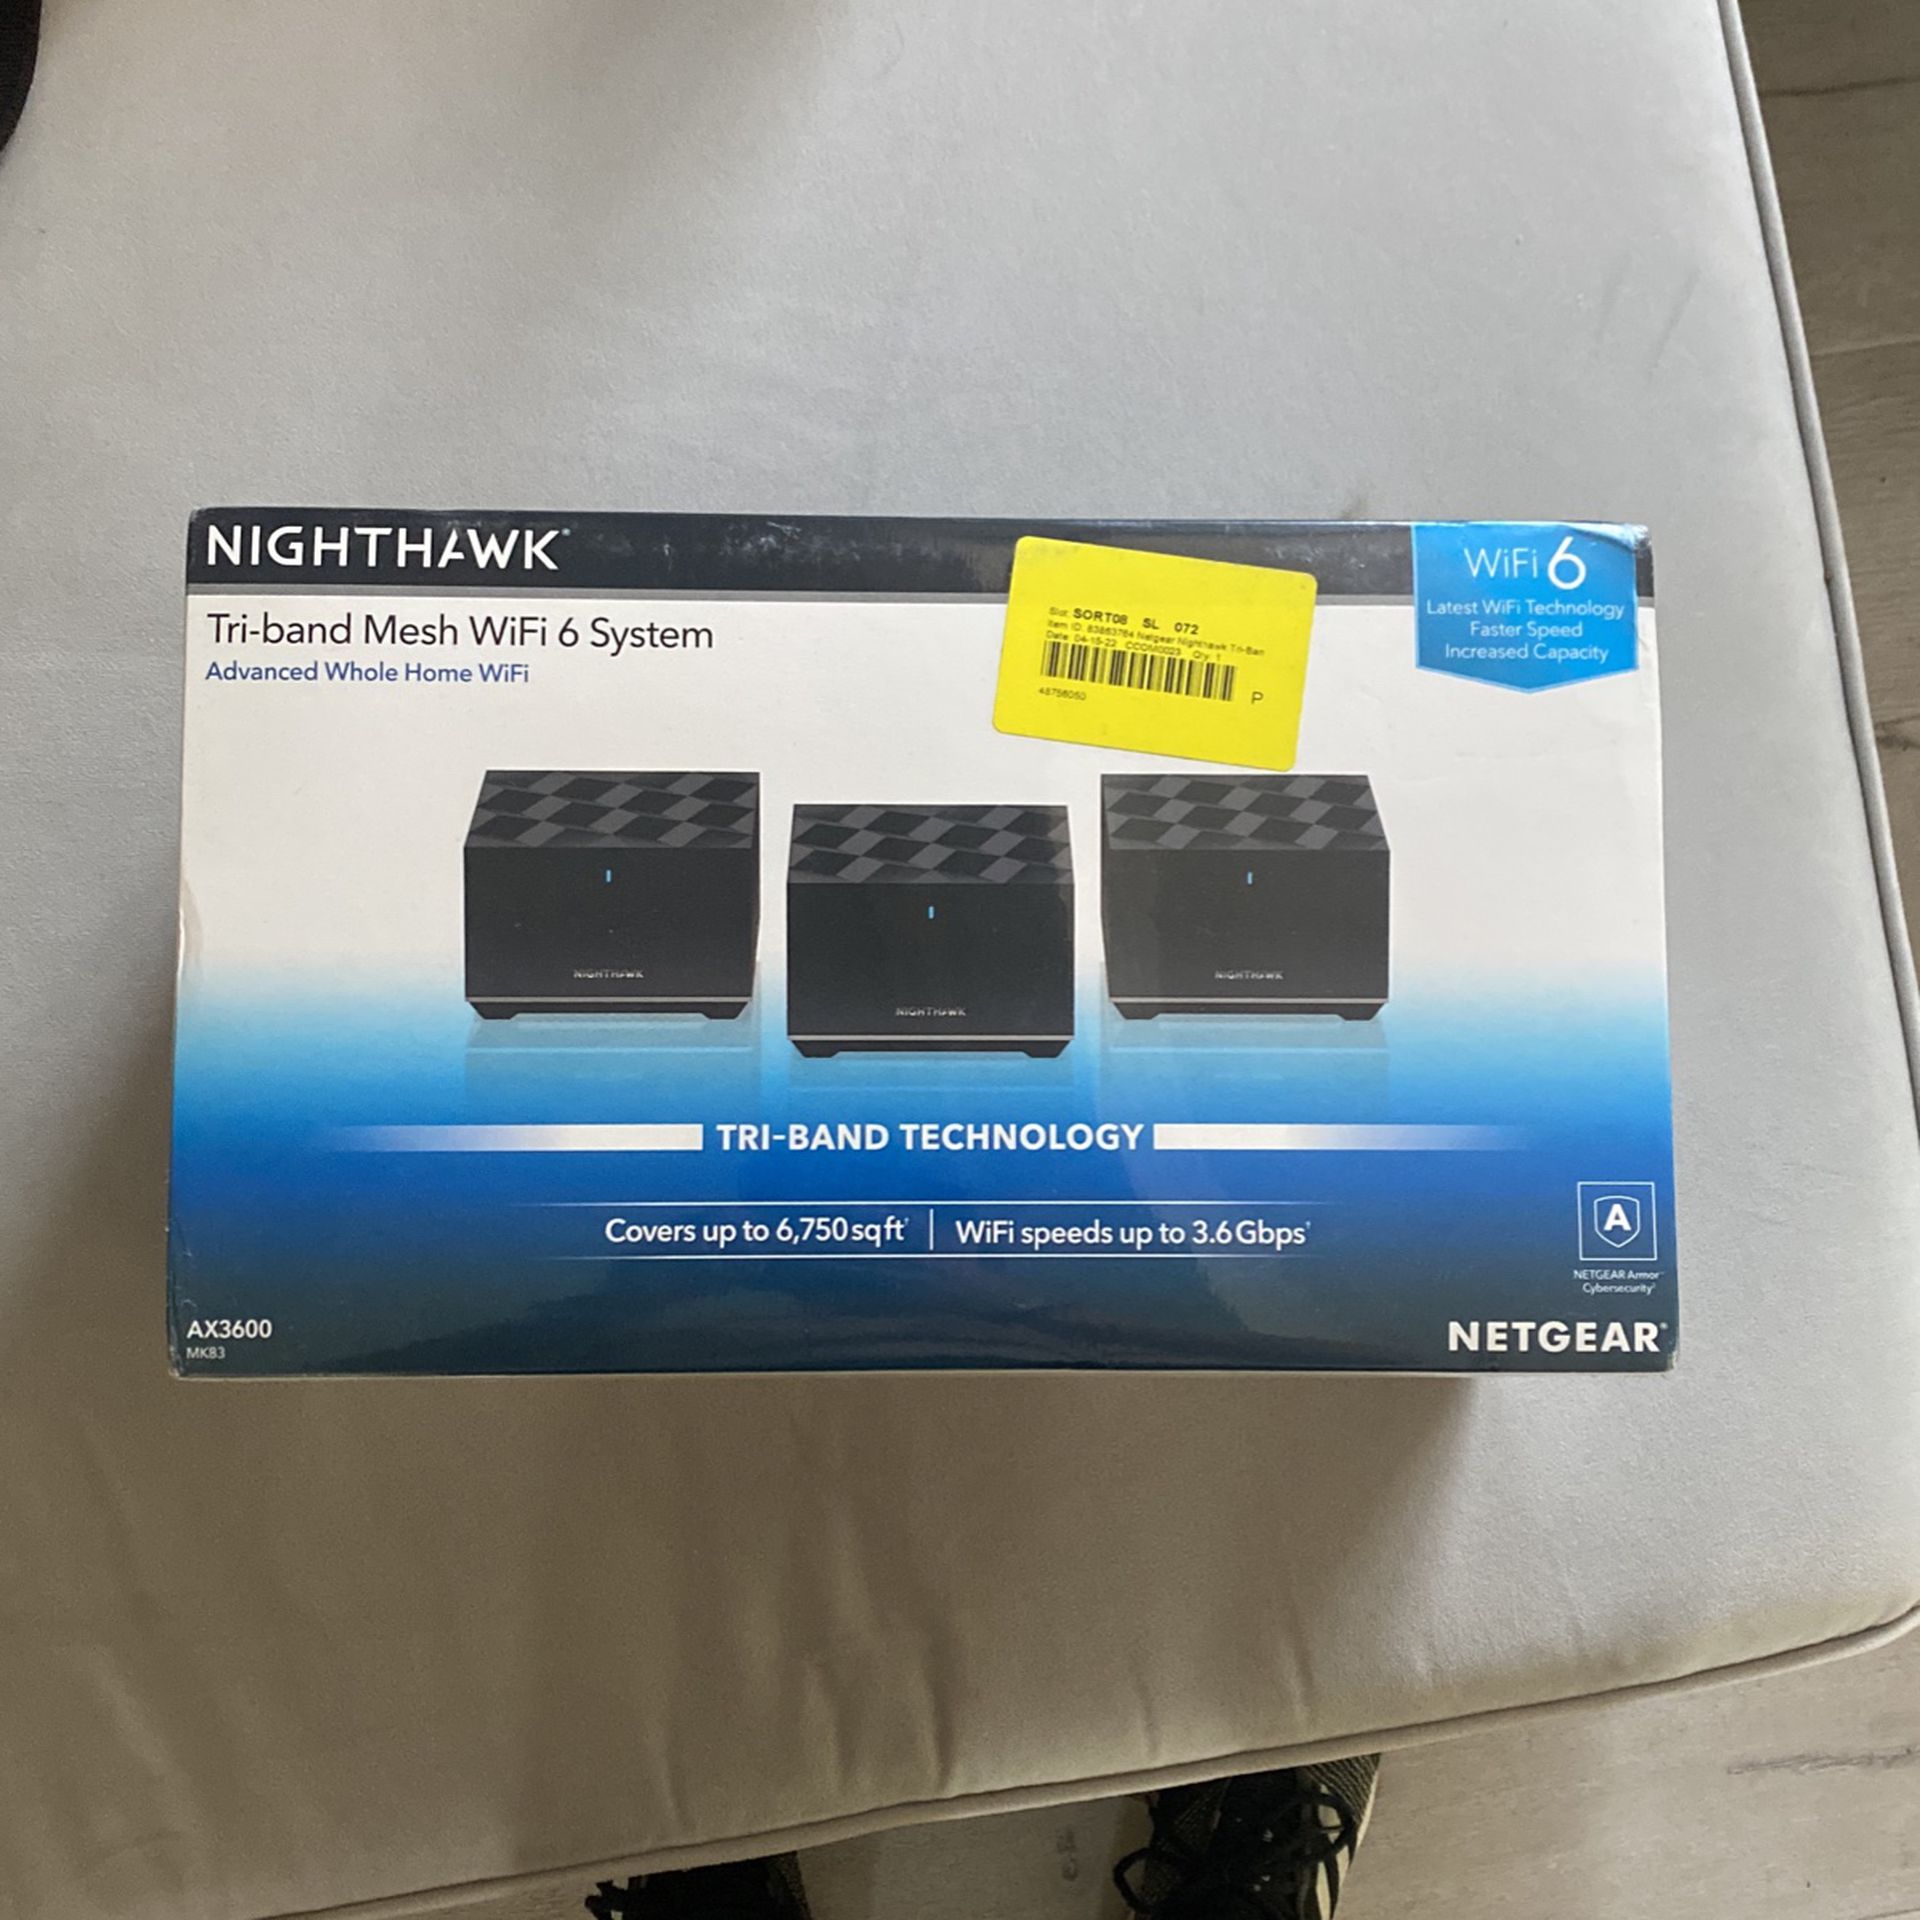 Netgear Nighthawk Wifi Router Tri-band Whole Home System